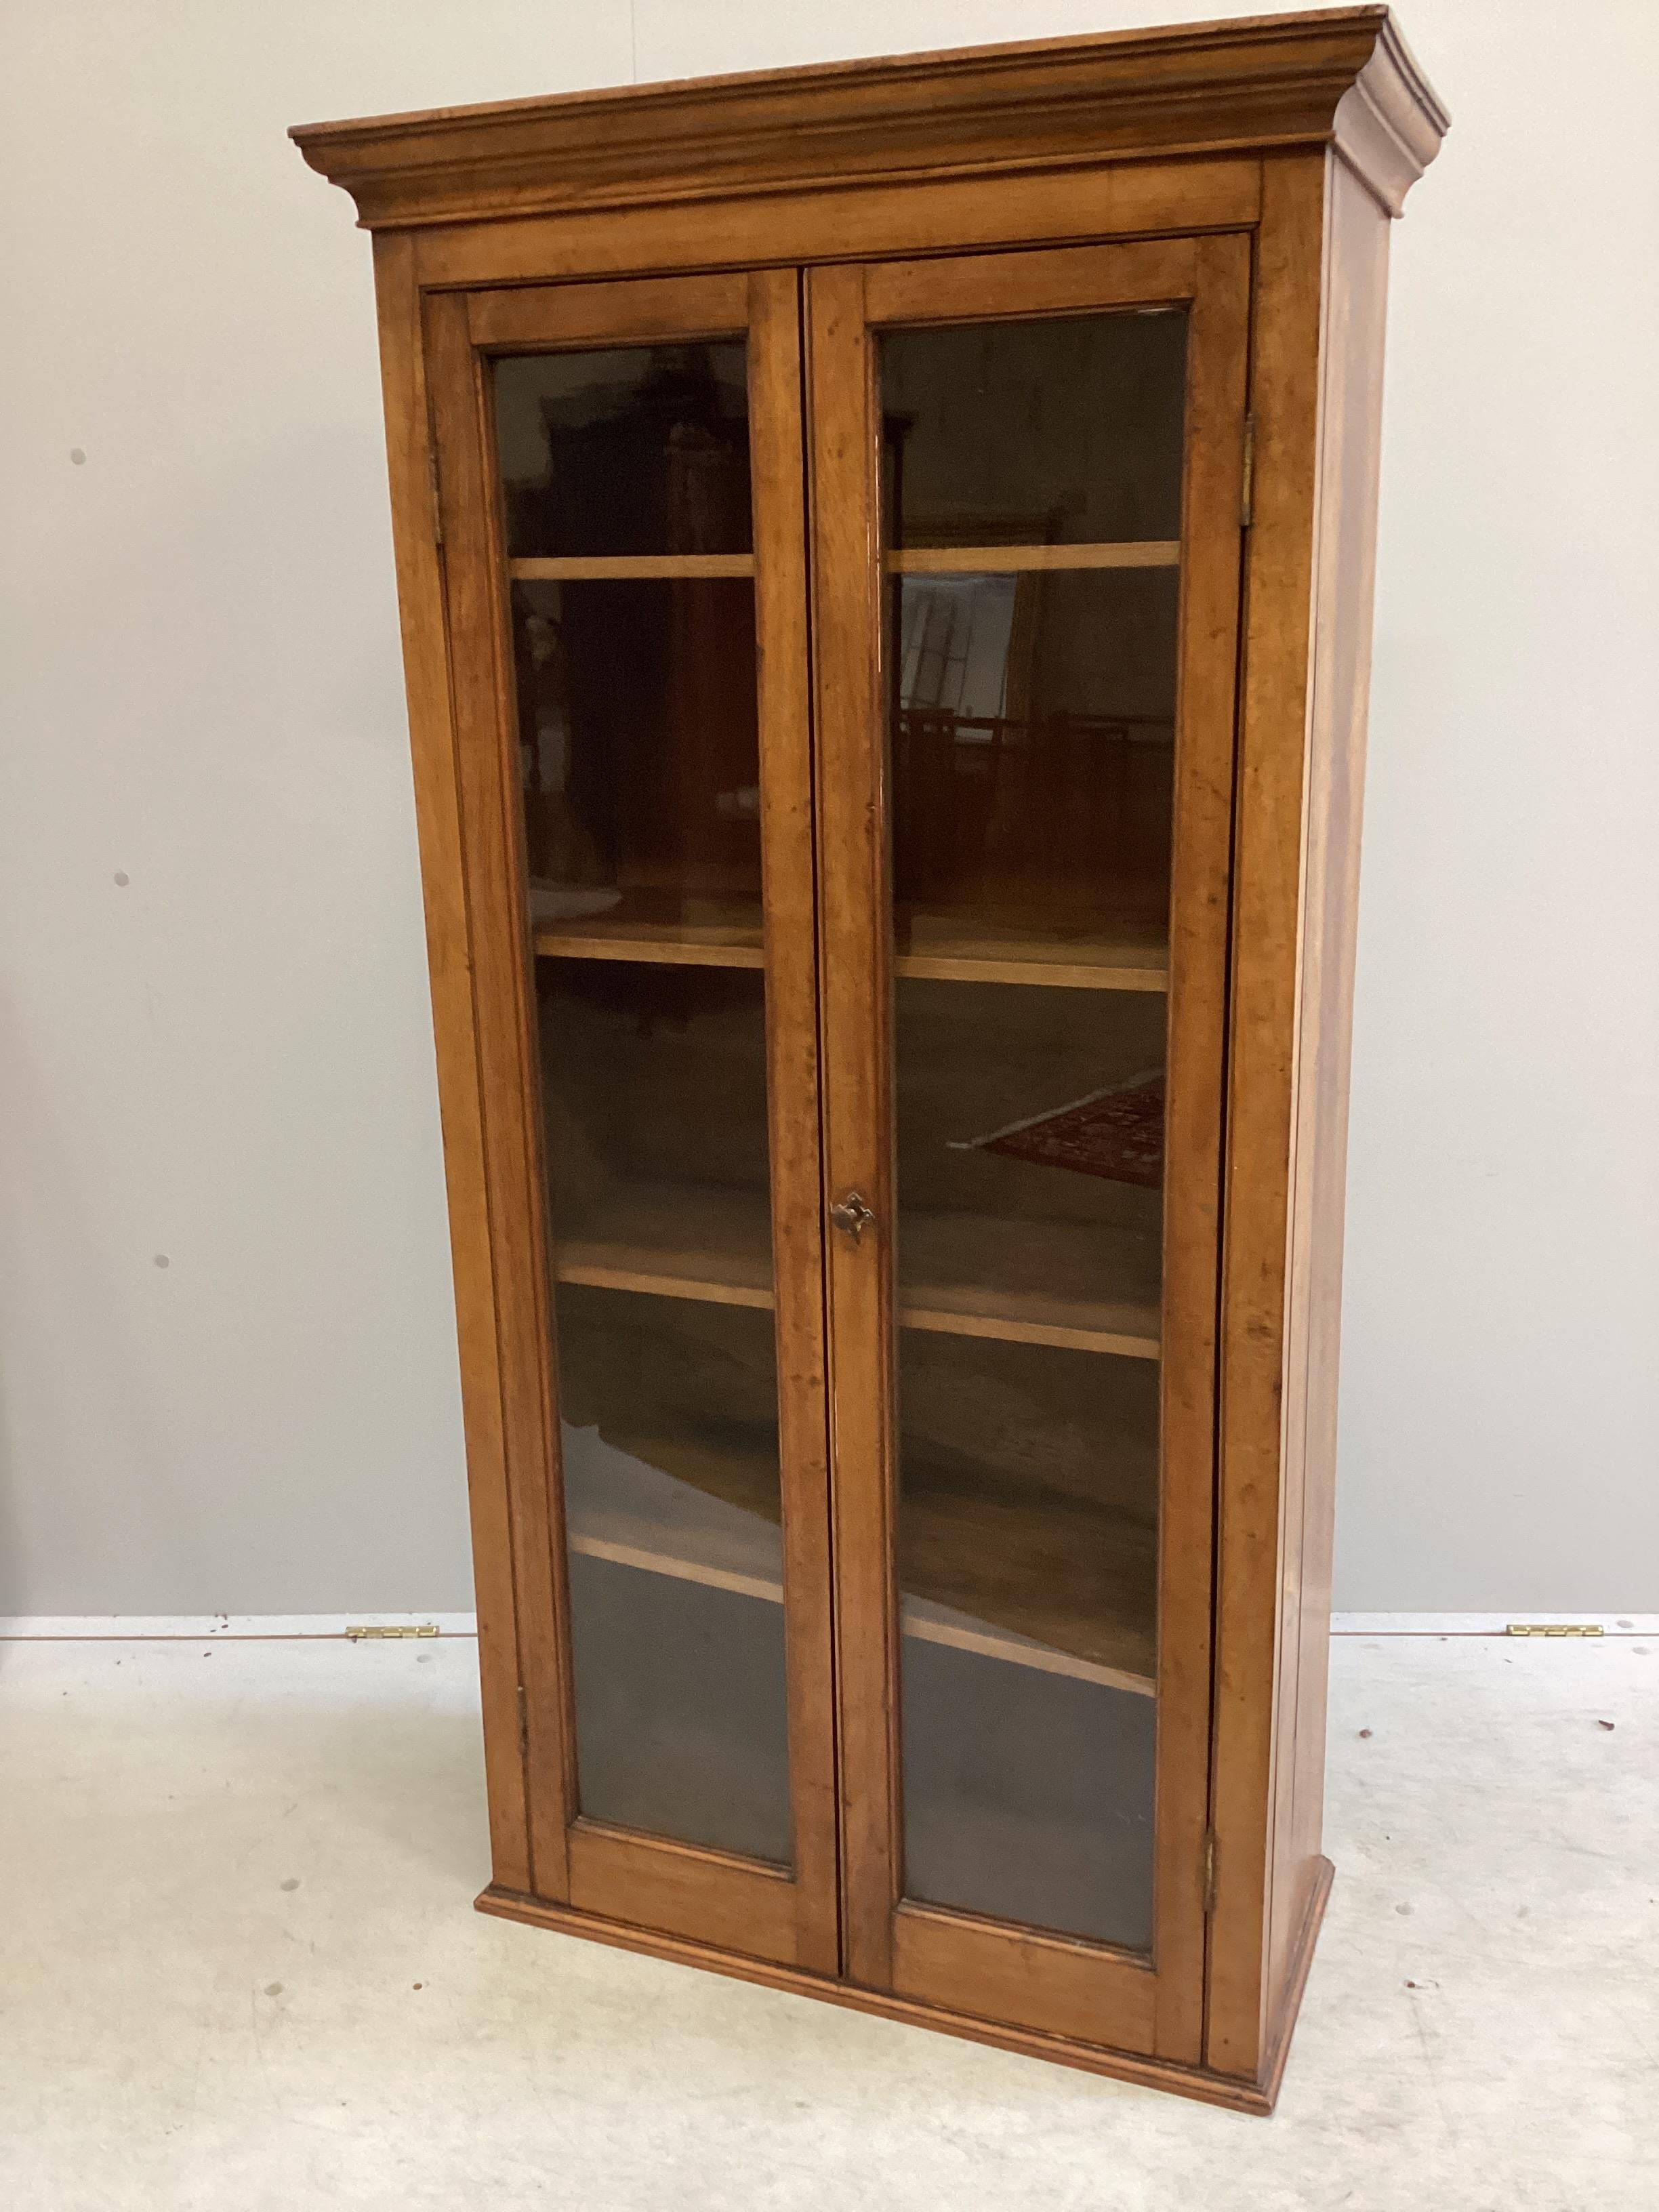 An early 20th century oak and mahogany narrow bookcase with later plinth foot, width 78cm, depth 36cm, height 153cm